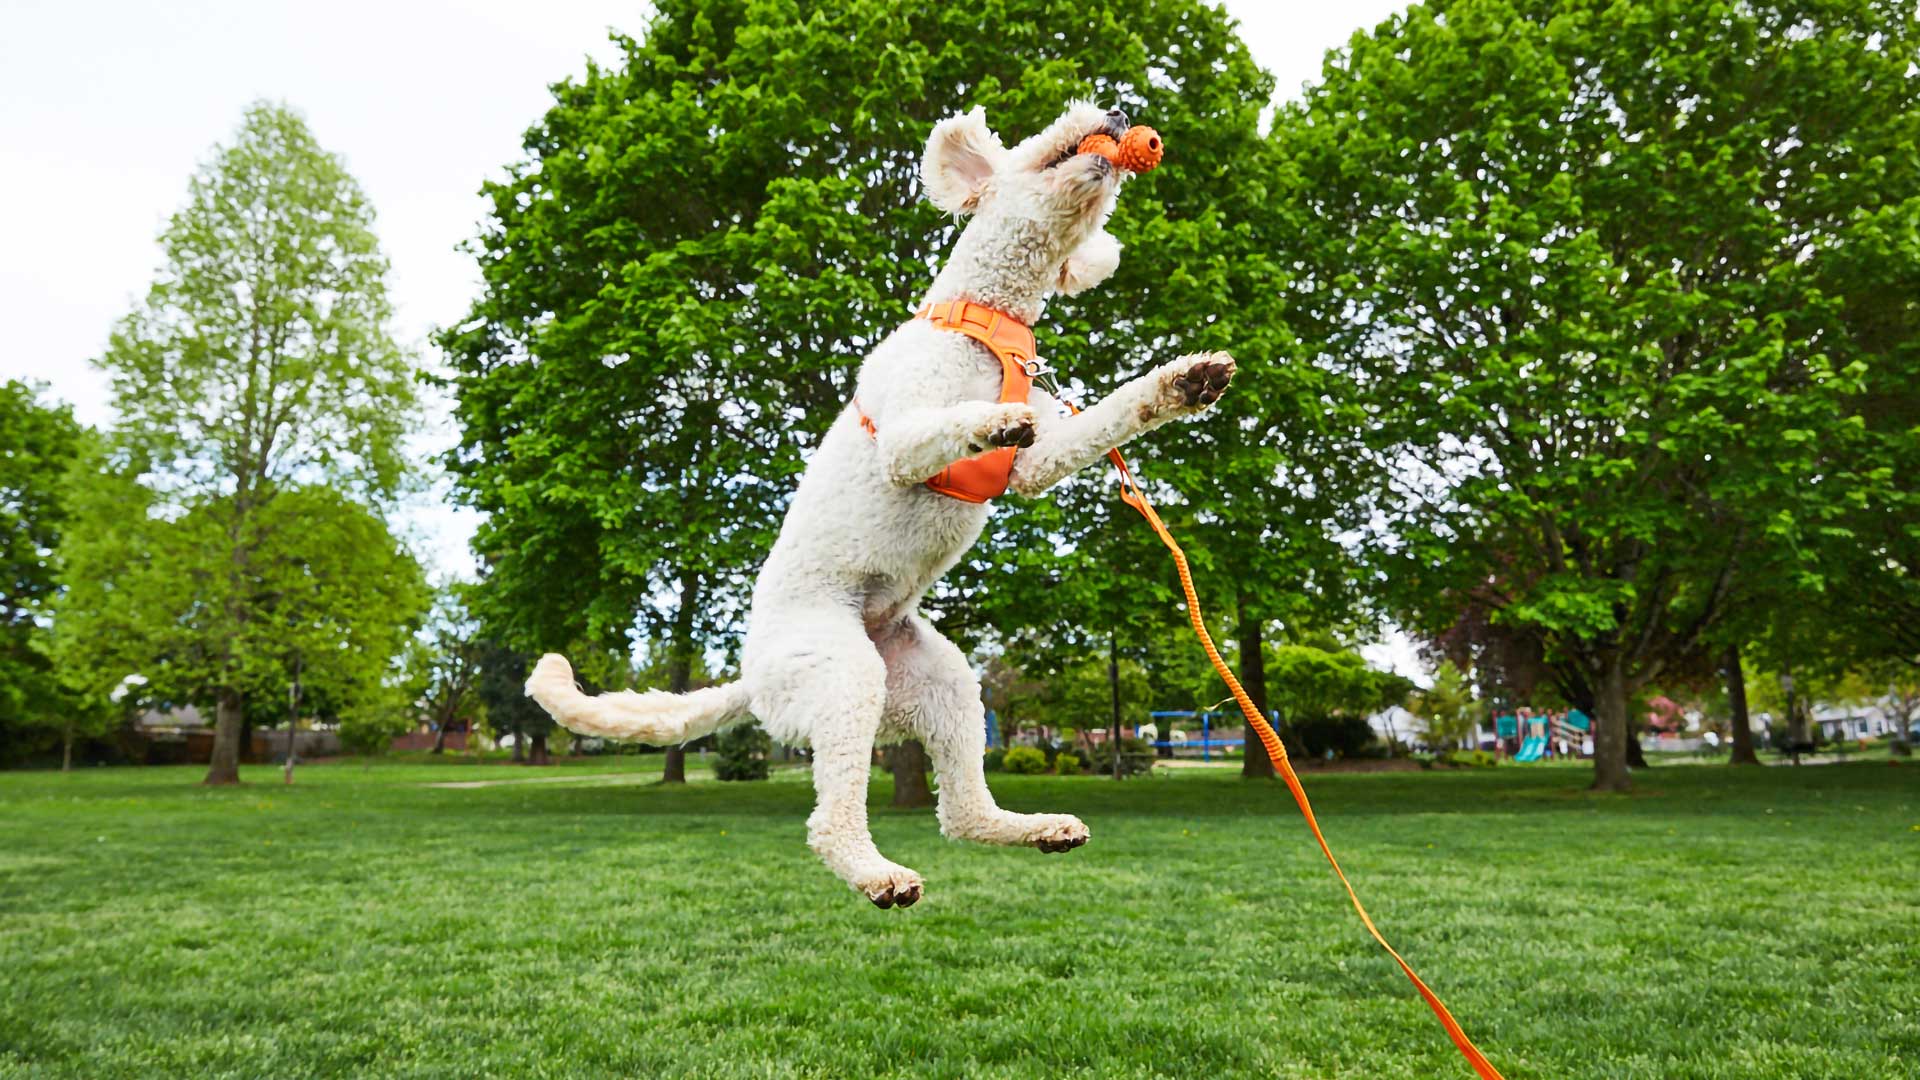 A small white dog wearing an orange harness leaping to catch a ball